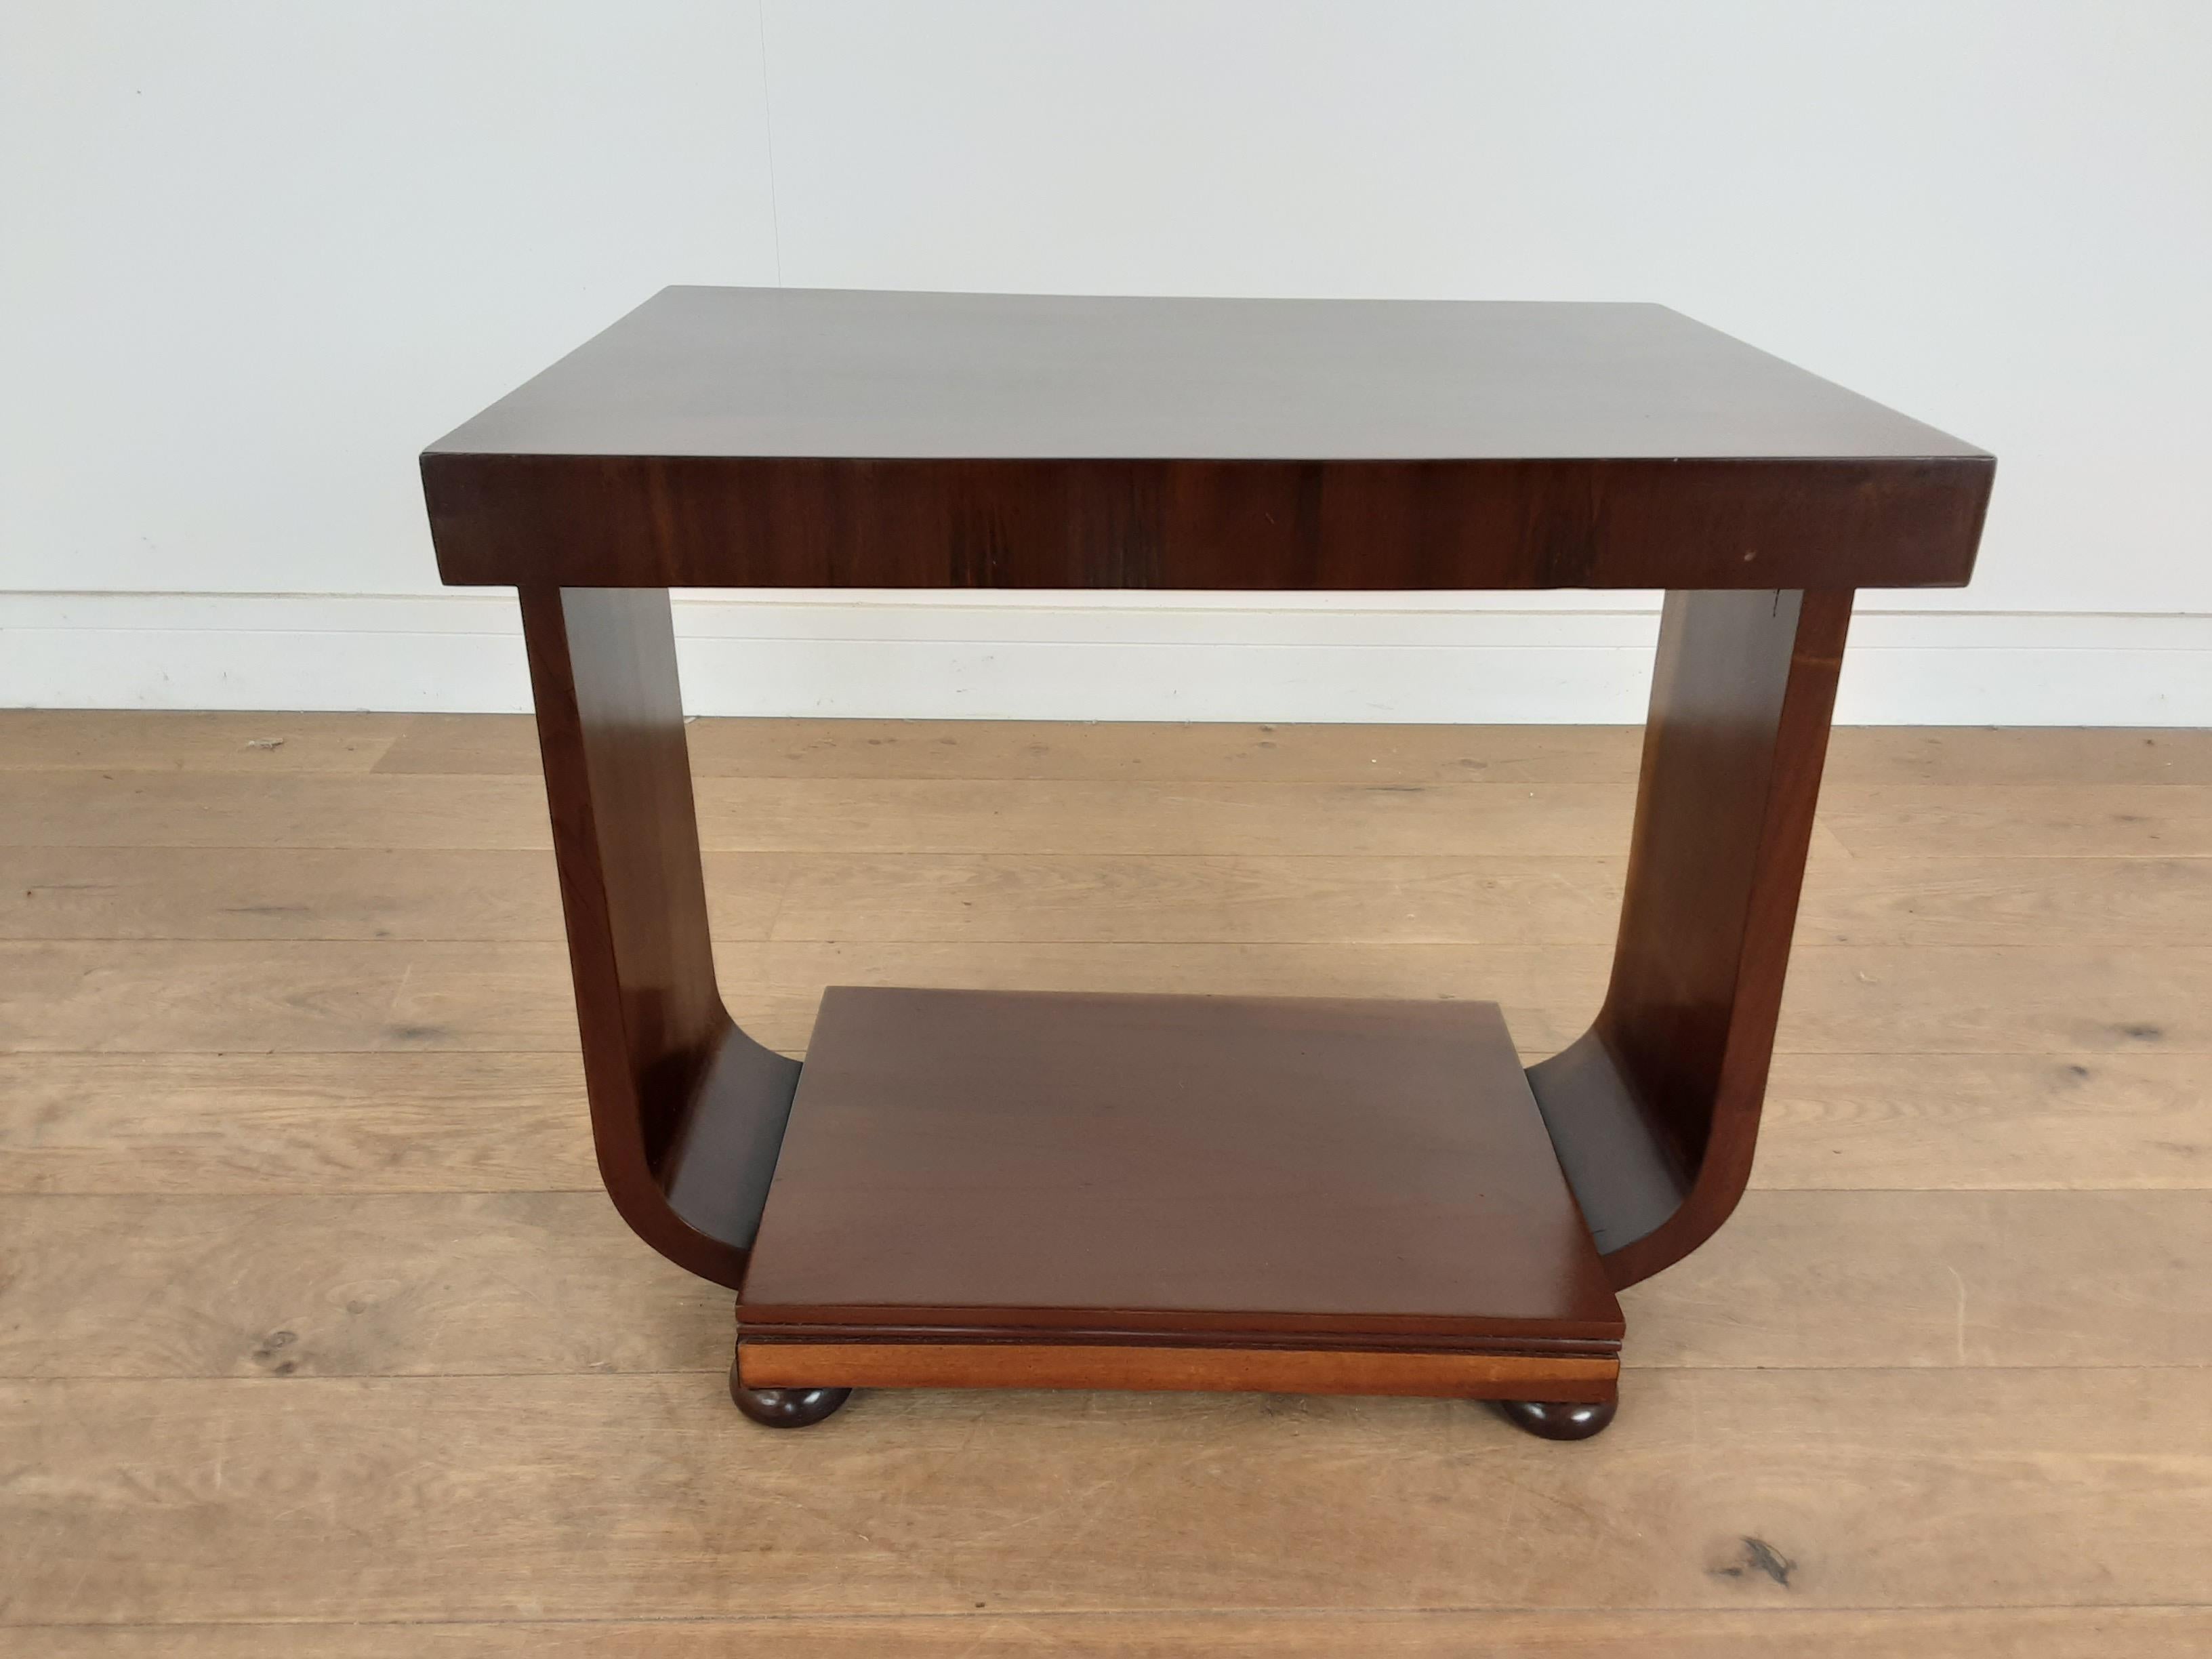 Art Deco table
Art Deco two-tier table with rectangle top in burr walnut with a walnut boarder, the straight flat sides with curved lower section which meets the base plinth, raised on bun feet.
British, circa 1930.
Measures: 53 cm H, 62 cm W, 45